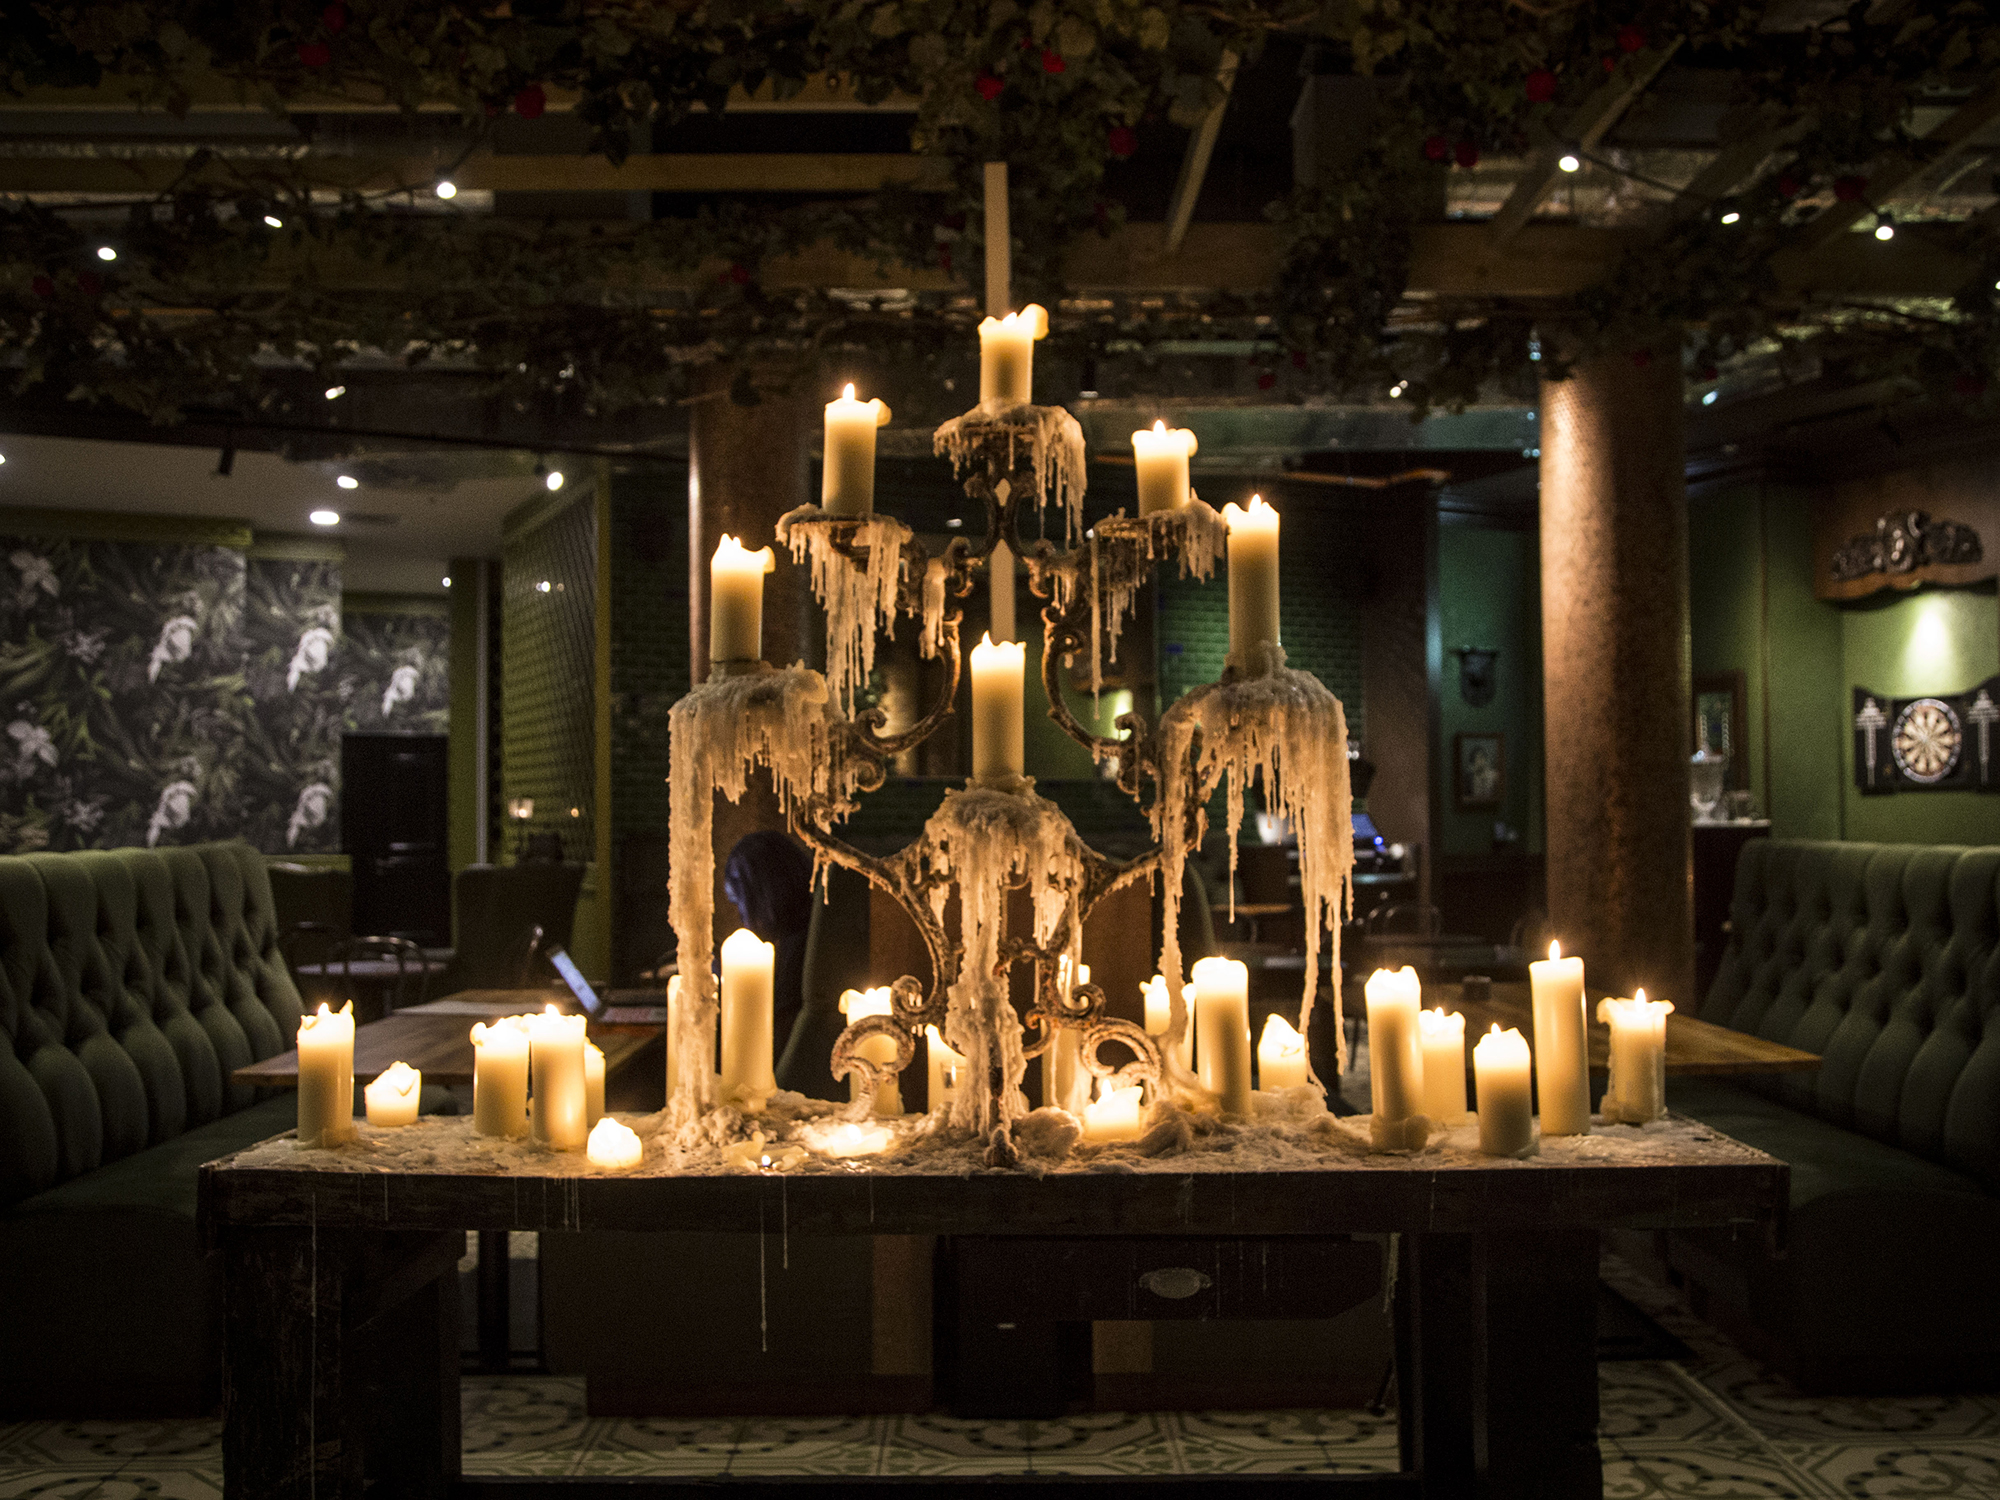 Photo of an ornate candle centre piece in a club bar